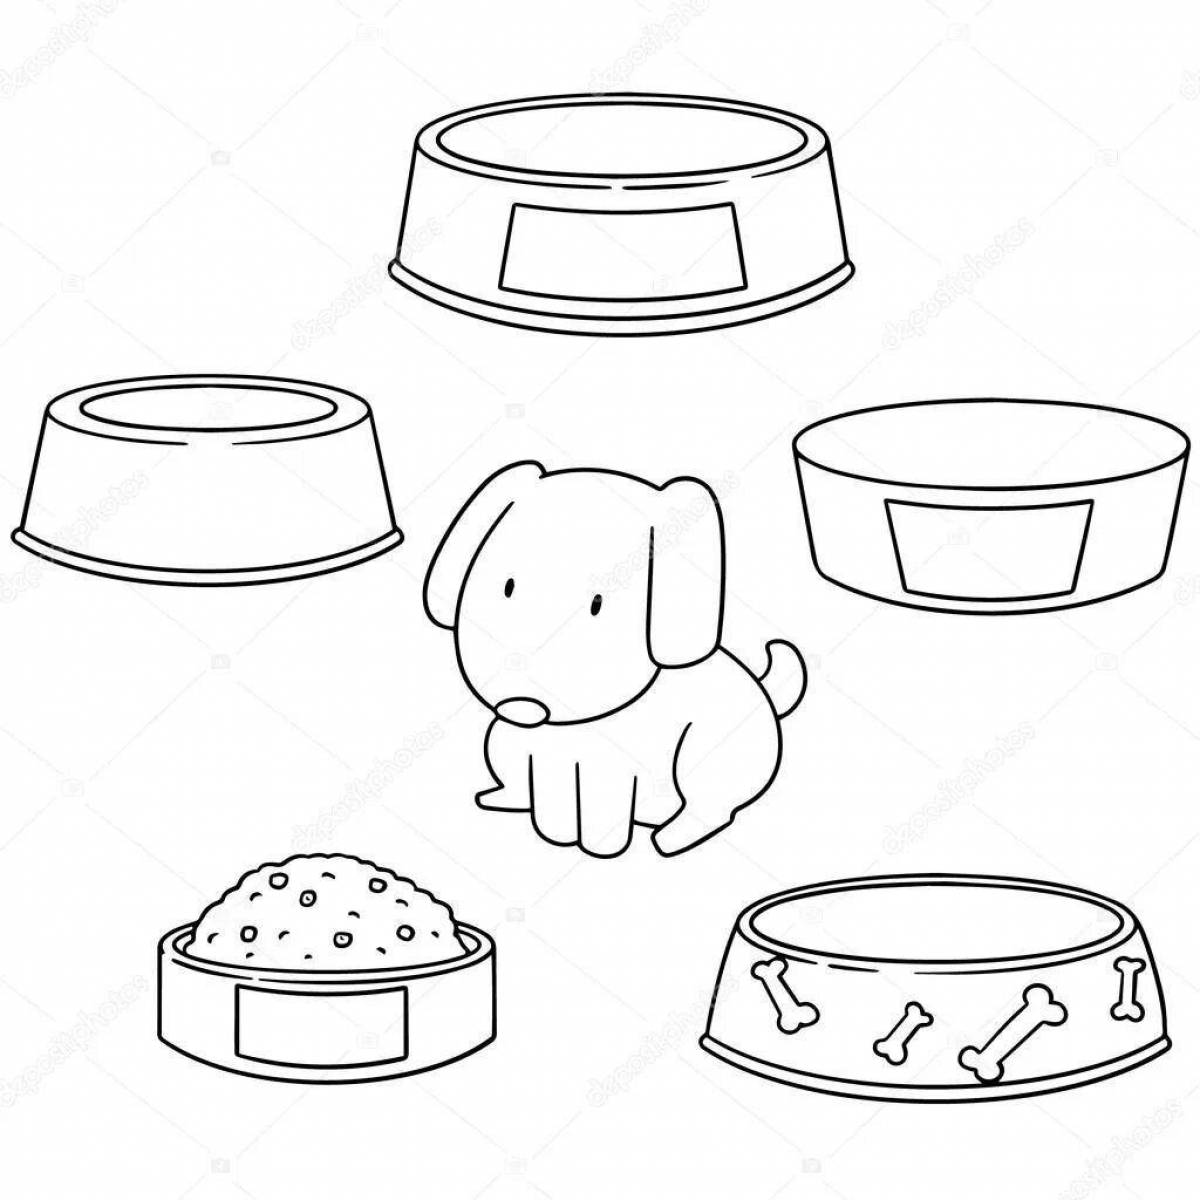 Adorable bowl coloring book for kids